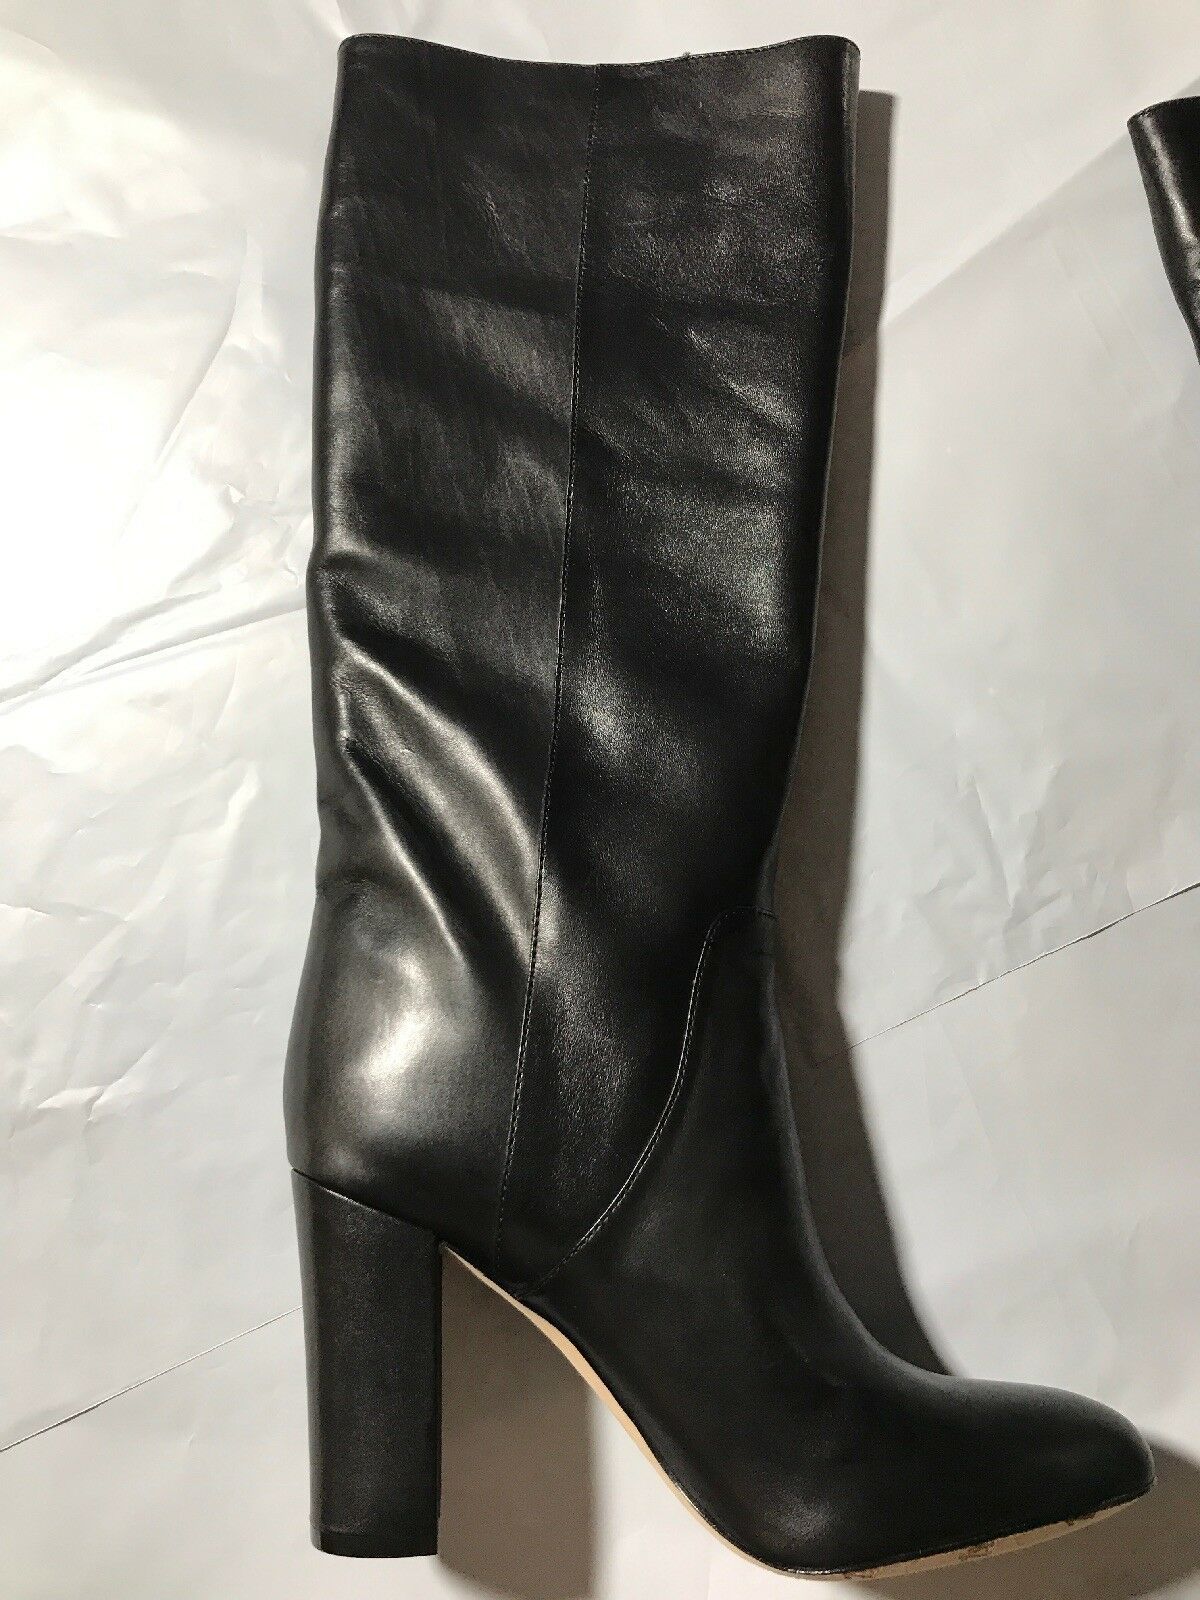 New Vince Camuto VC Signature Women's Tiona Black Leather Boots $450 Wide Calf 